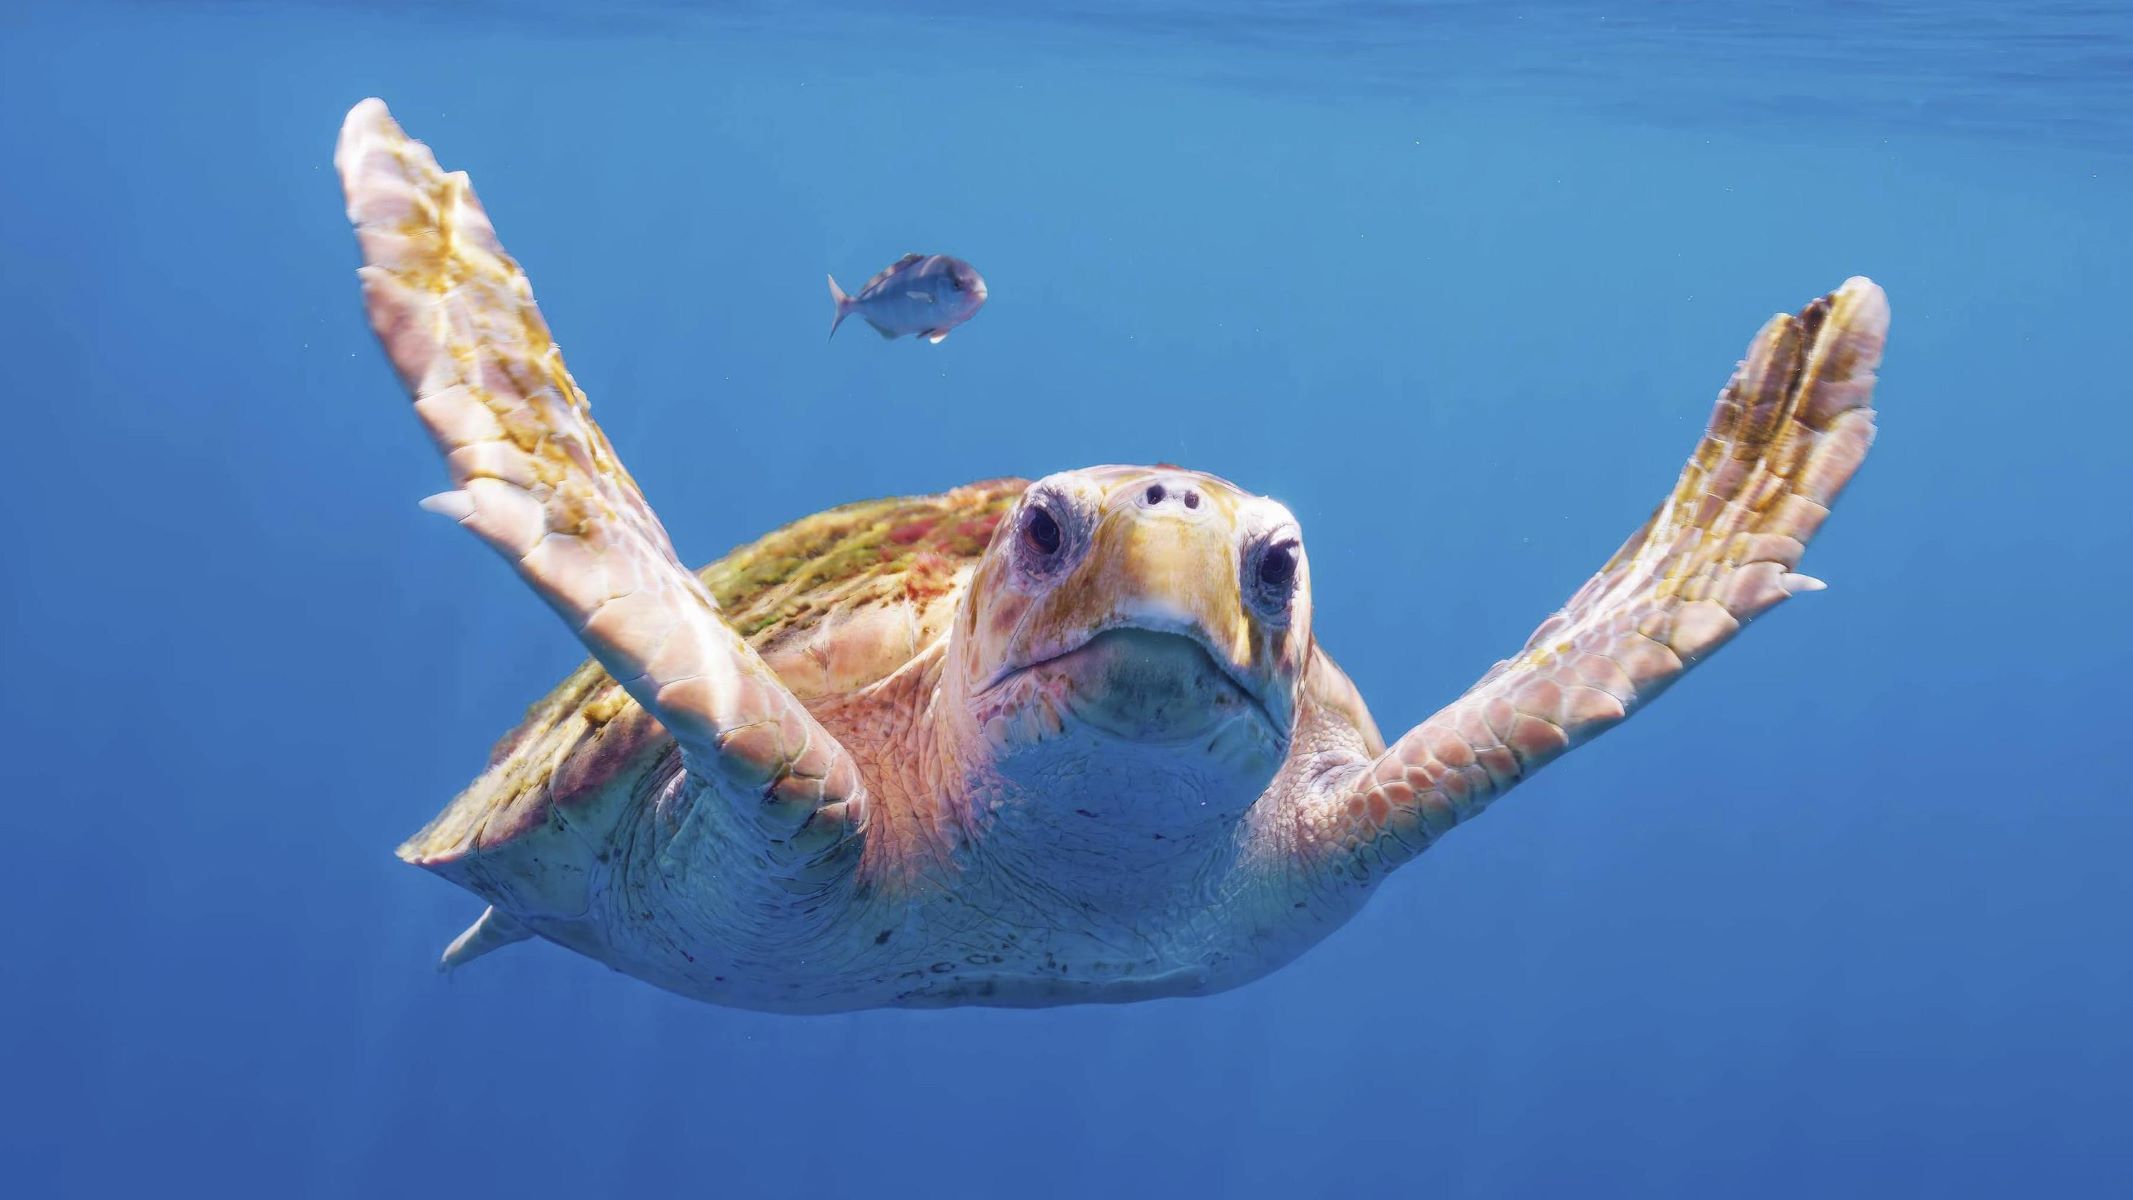 The Surprising Meaning Behind Recent Turtle Dreams - You Won't Believe What It Reveals!